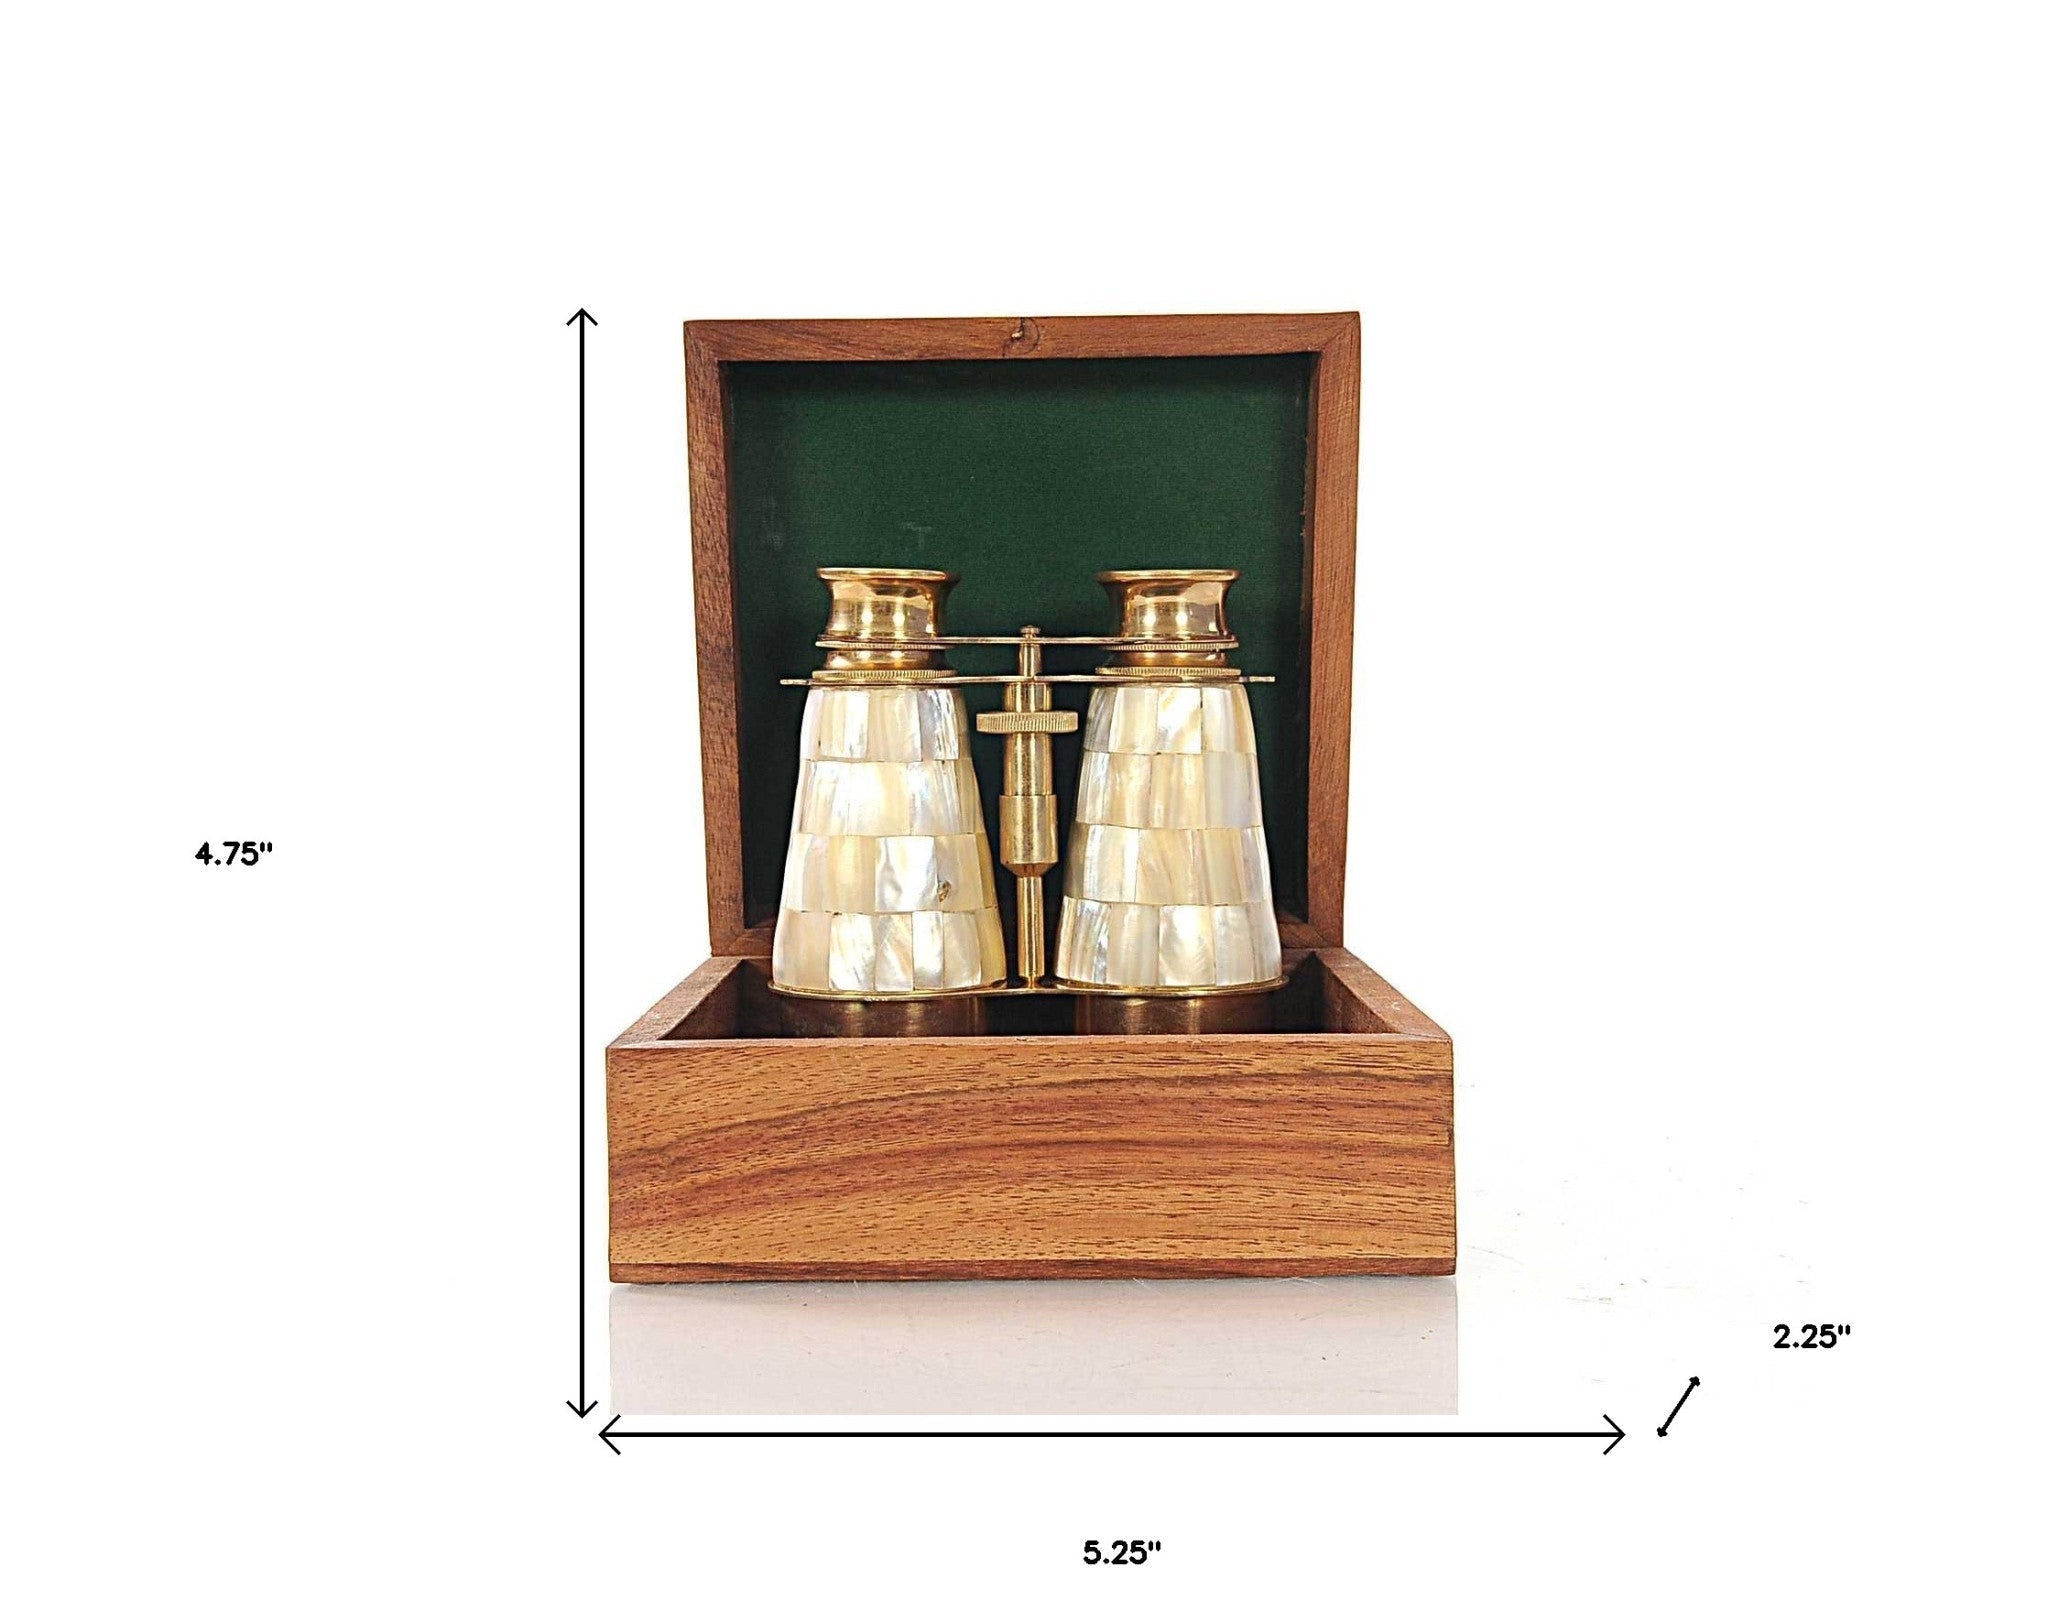 Elegant Brass And Mother Of Pearl Binoculars In Wooden Storage Box - Tuesday Morning-Sculptures